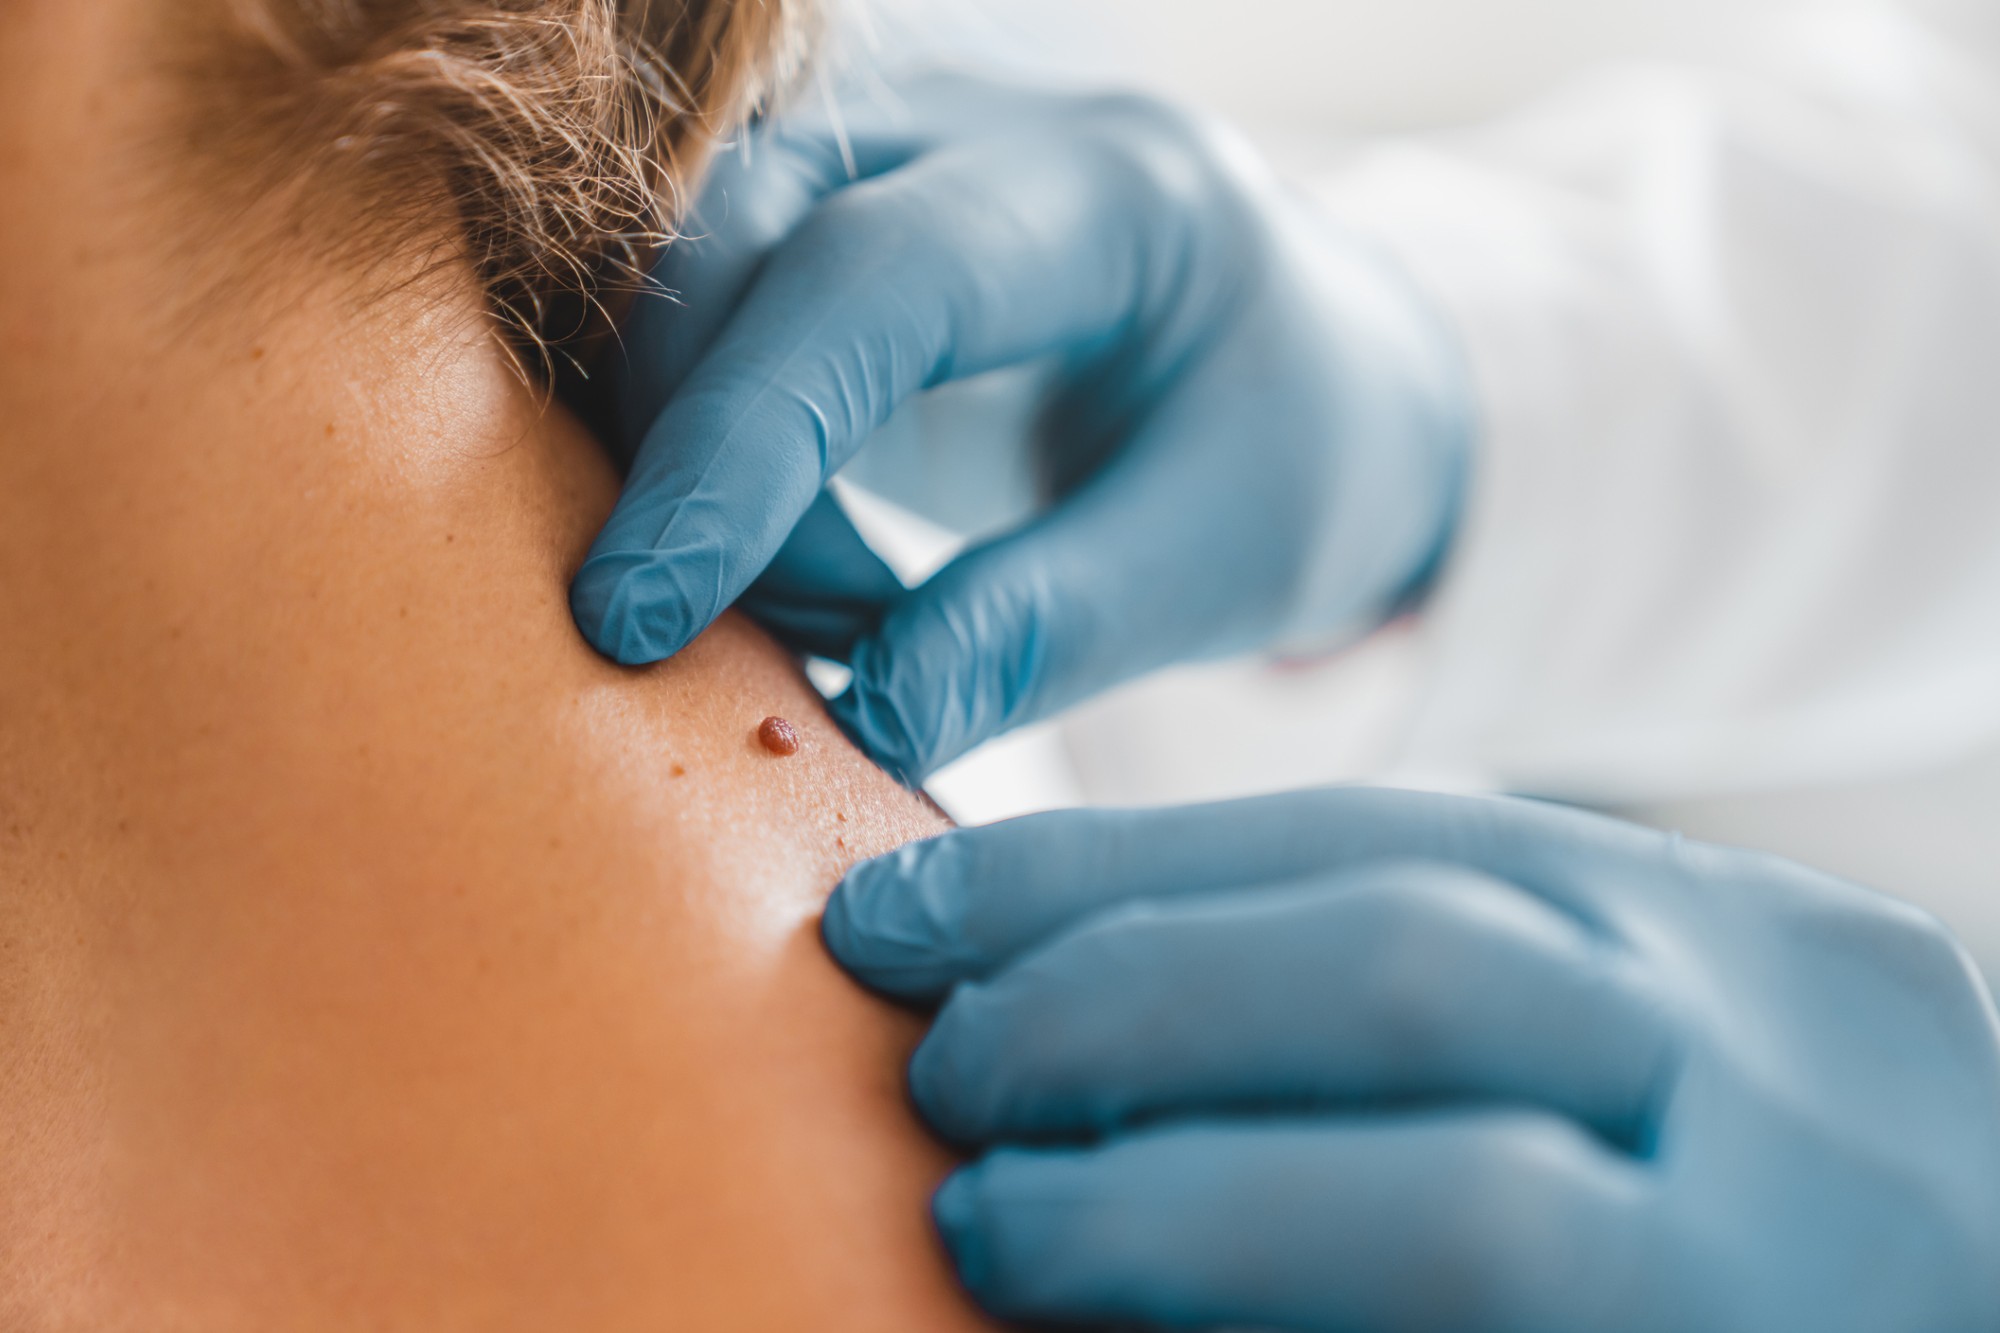 Mole Removal for Skin Health: When Is It Necessary?